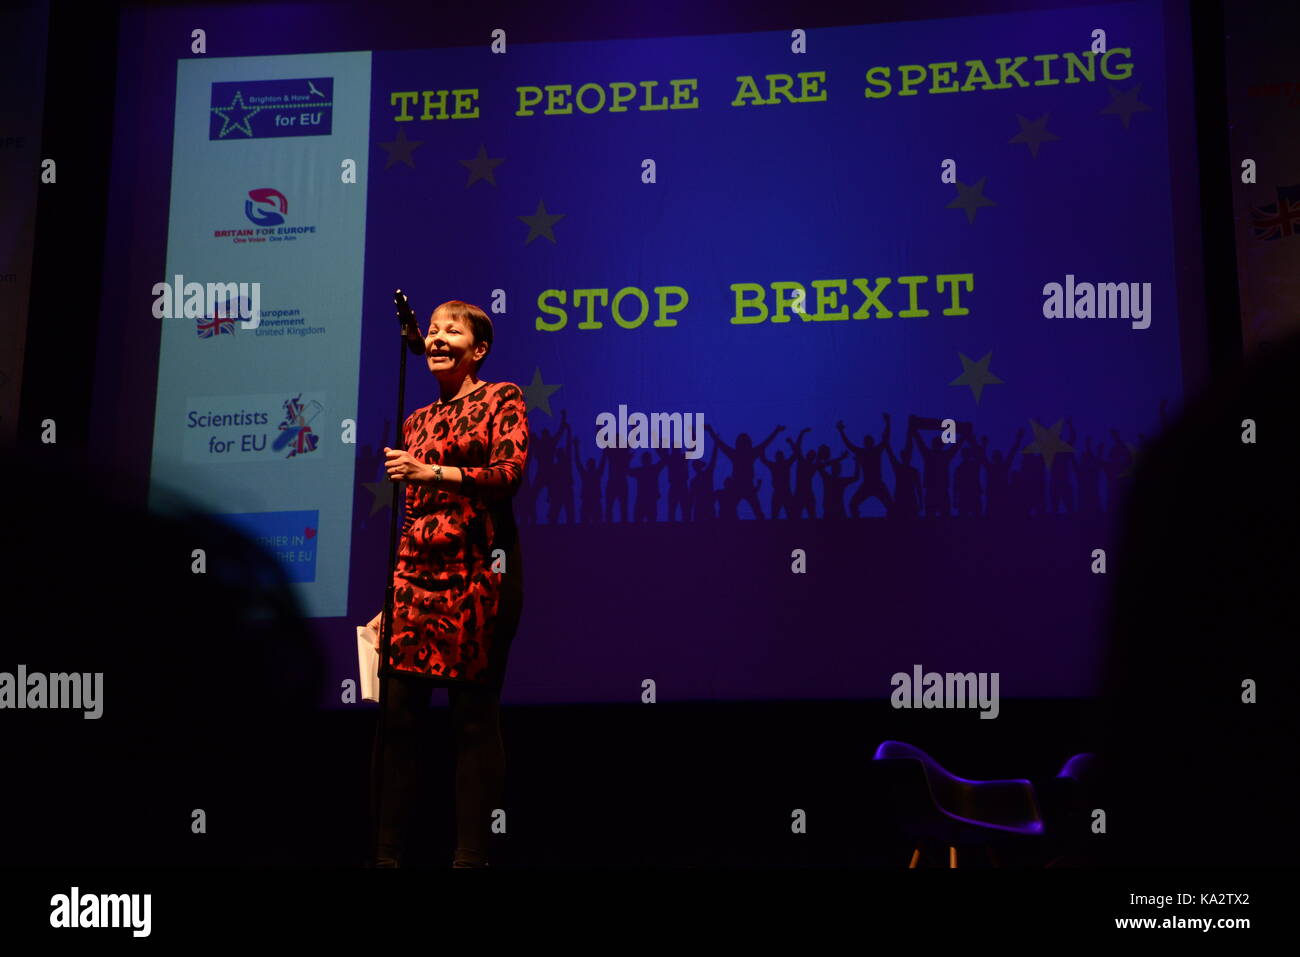 Brighton, UK. 24th September, 2017. After the Brighton and Hove for EU march and rally earlier in the day, Caroline Lucas, MP for Brighton Pavilion and co-leader of the Green Party, speaks to the marchers in the evening at the Brighton Dome theatre. Credit: Aztec Images/Alamy Live News Stock Photo